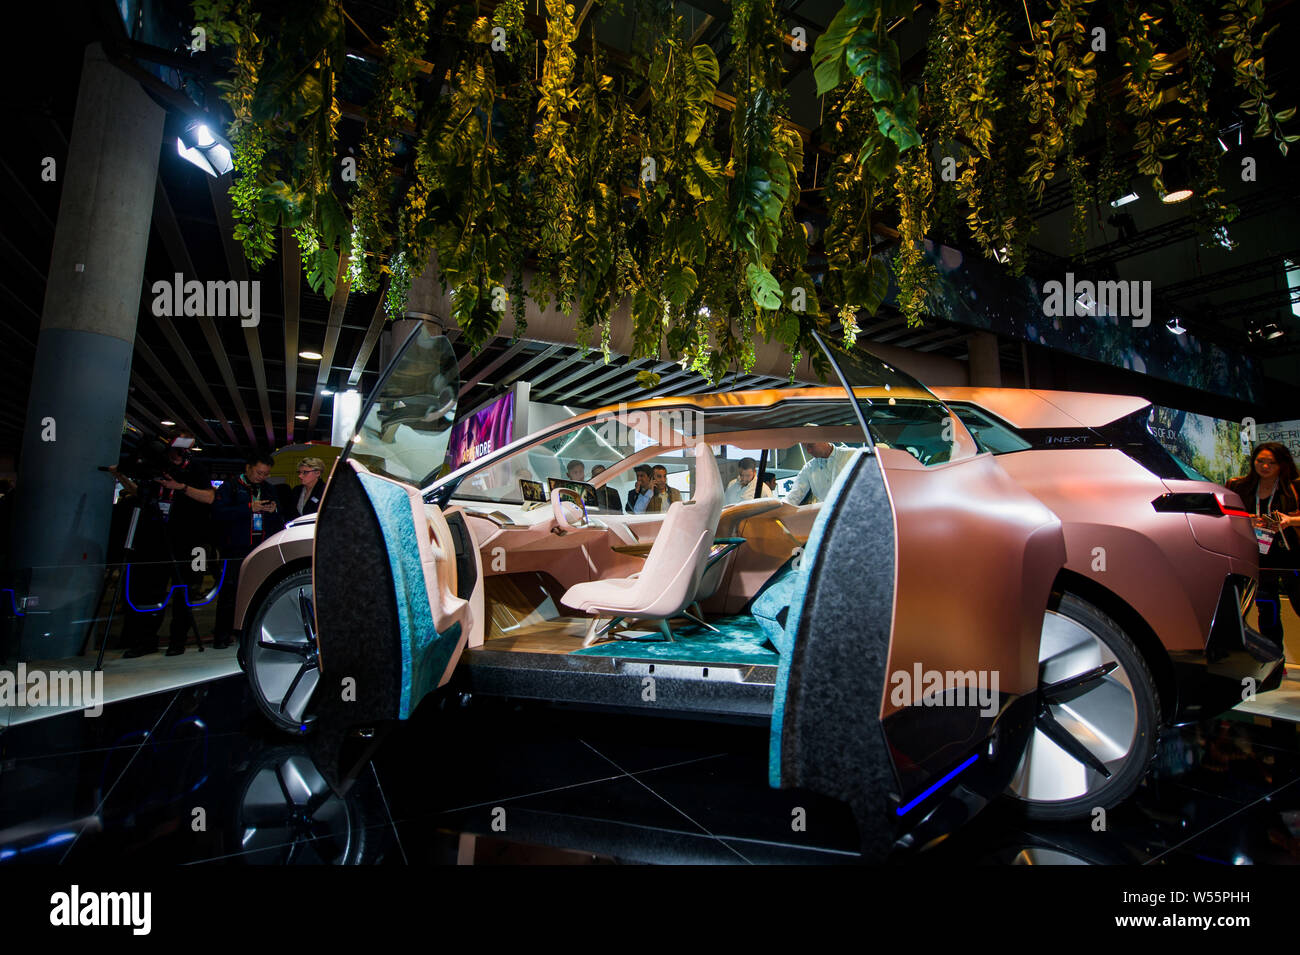 Visitors view the BMW Vision iNext concept car on display during the Mobile World Congress 2019 (MWC19) in Barcelona, Spain, 25 February 2019. Stock Photo